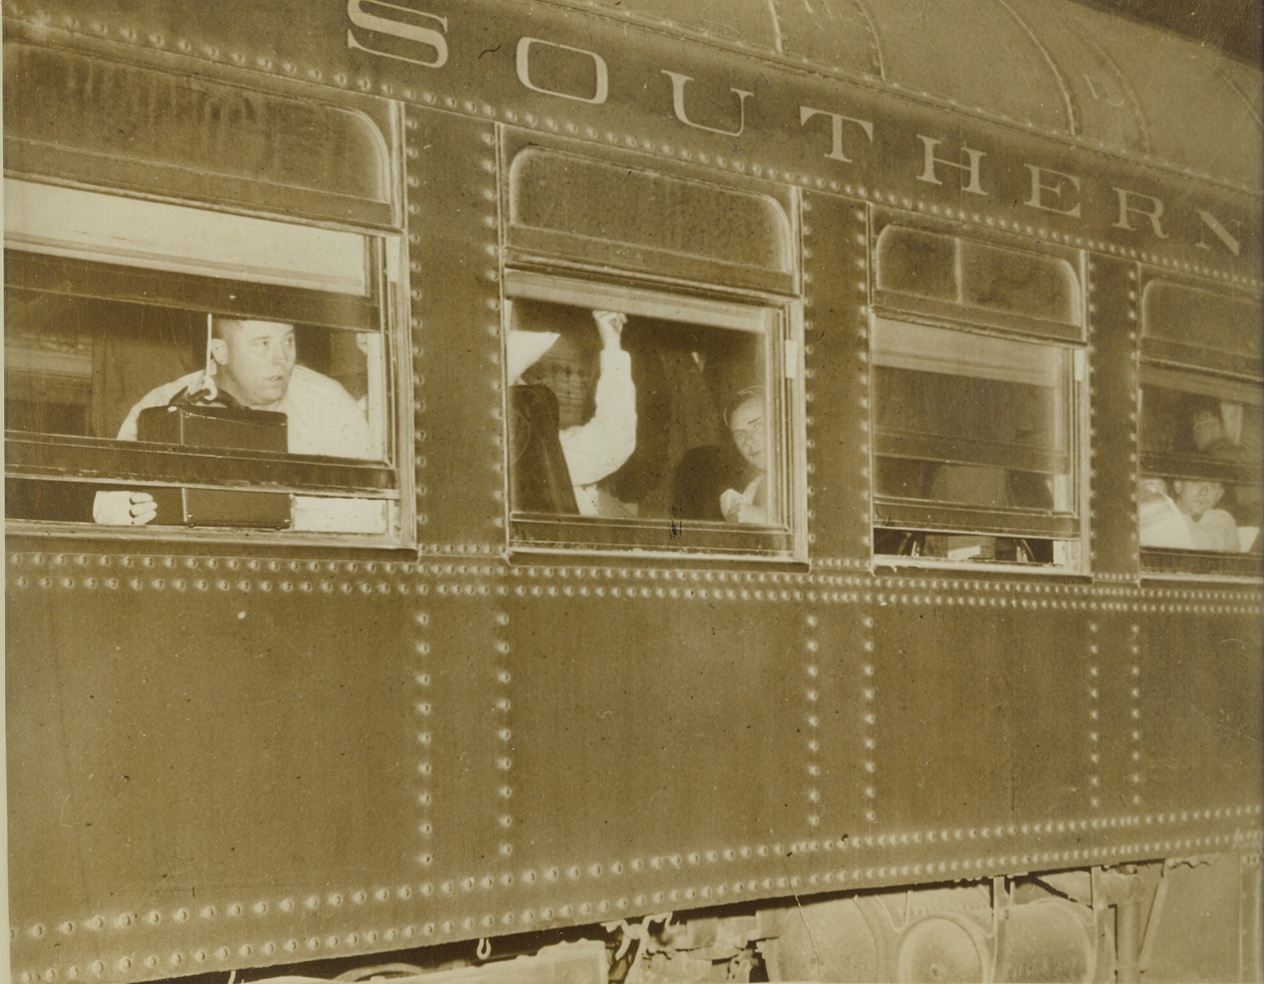 CREW OF SCUTTLED GERMAN LINER INTERNED, 2/1/41  EL PASO, TEX. – Members of the crew of the scuttled German liner Columbus peek from windows of their closely guarded railroad car while enroute for Fort [illegible], in southern New Mexico, where they will be interned for the duration of the European war. Credit: ACME;